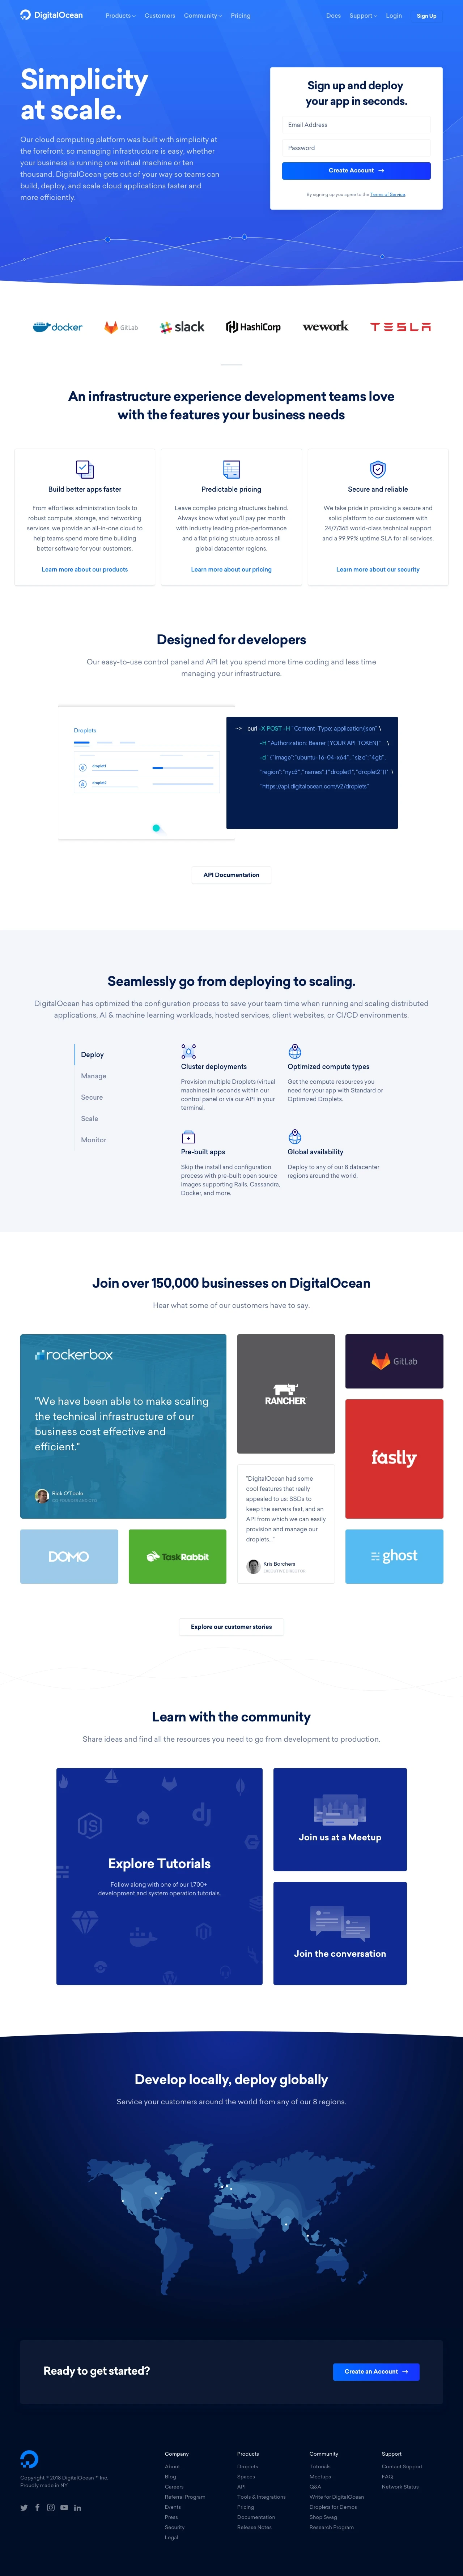 DigitalOcean Landing Page Example: Our cloud computing platform was built with simplicity at the forefront, so managing infrastructure is easy, whether your business is running one virtual machine or ten thousand.